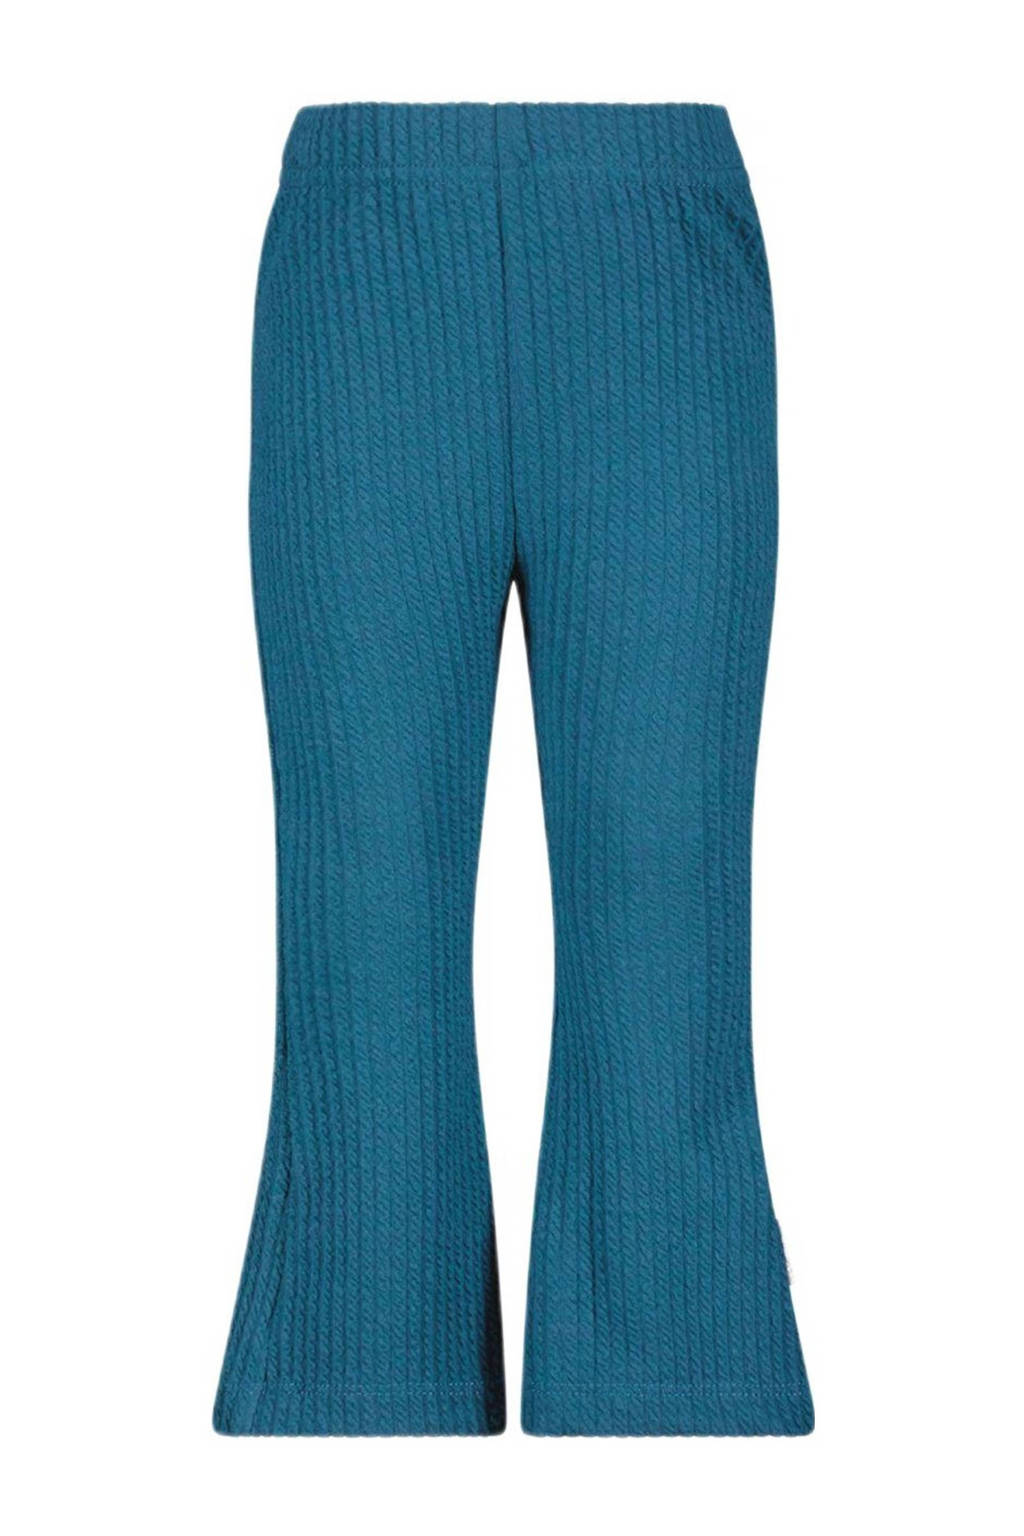 baby high waist flared broek B.VICTORIOUS turquoise